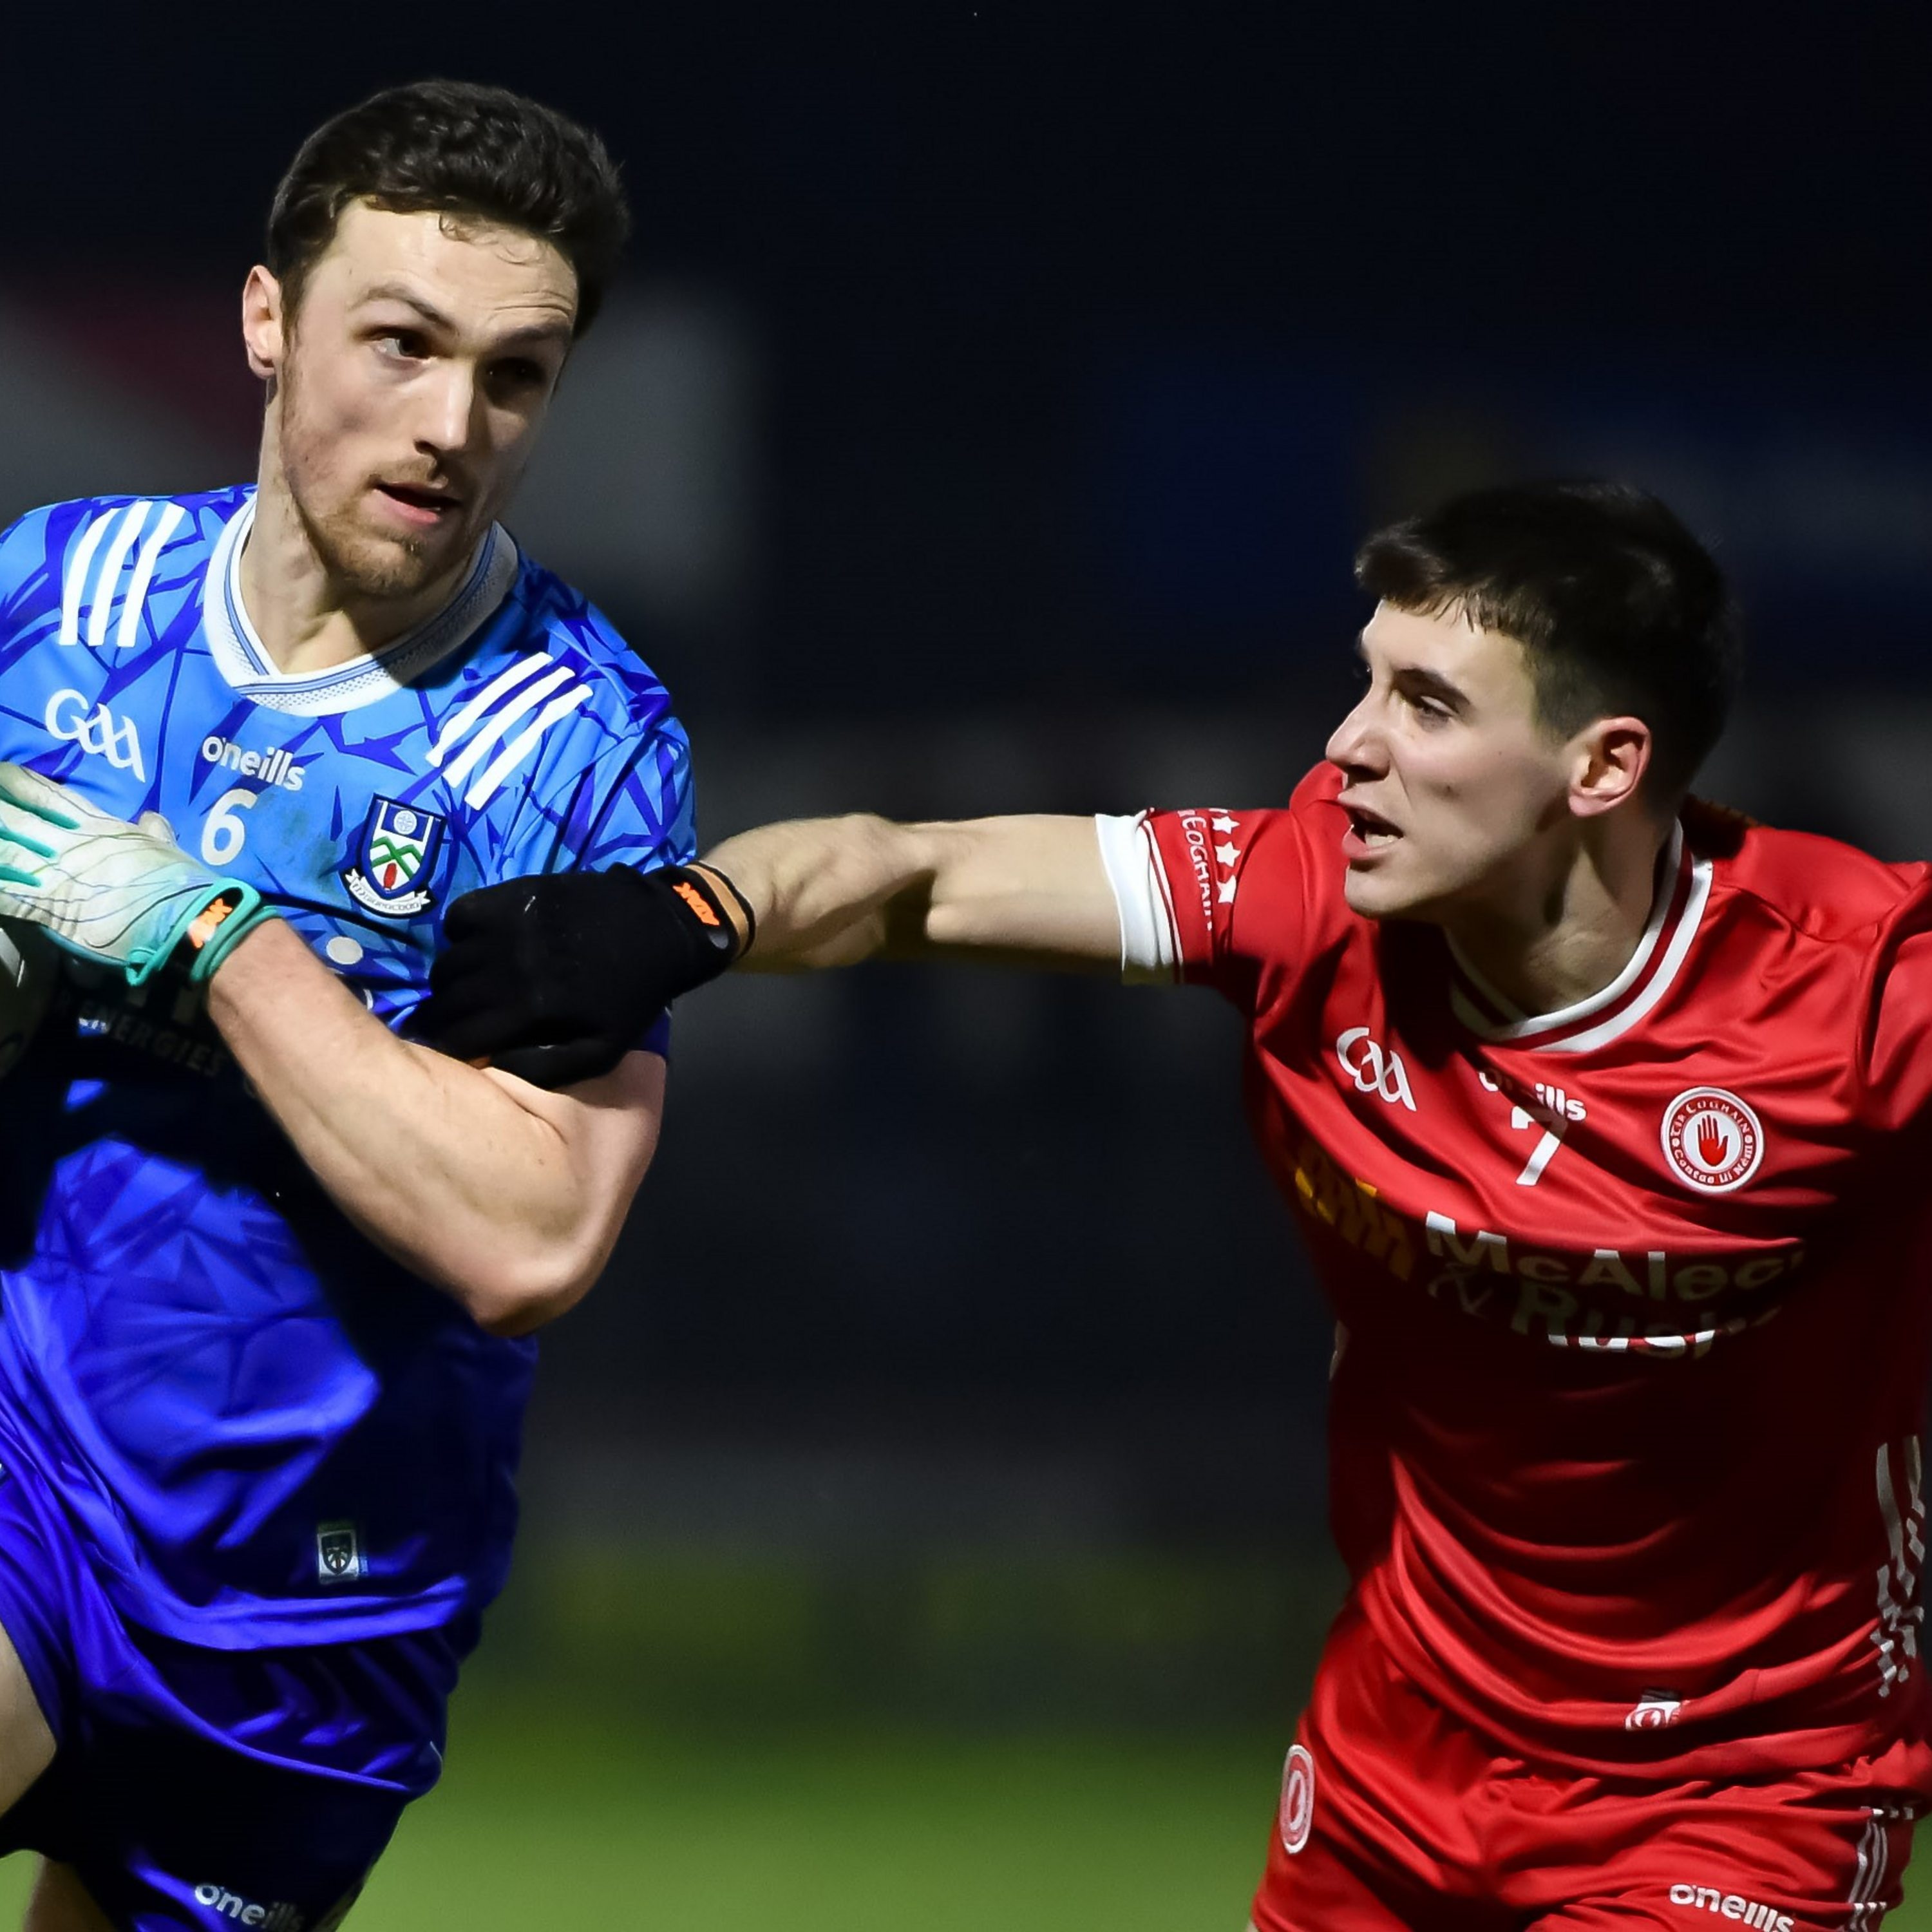 Monaghan relegated, Tyrone safe & the exceptional Niall Devlin